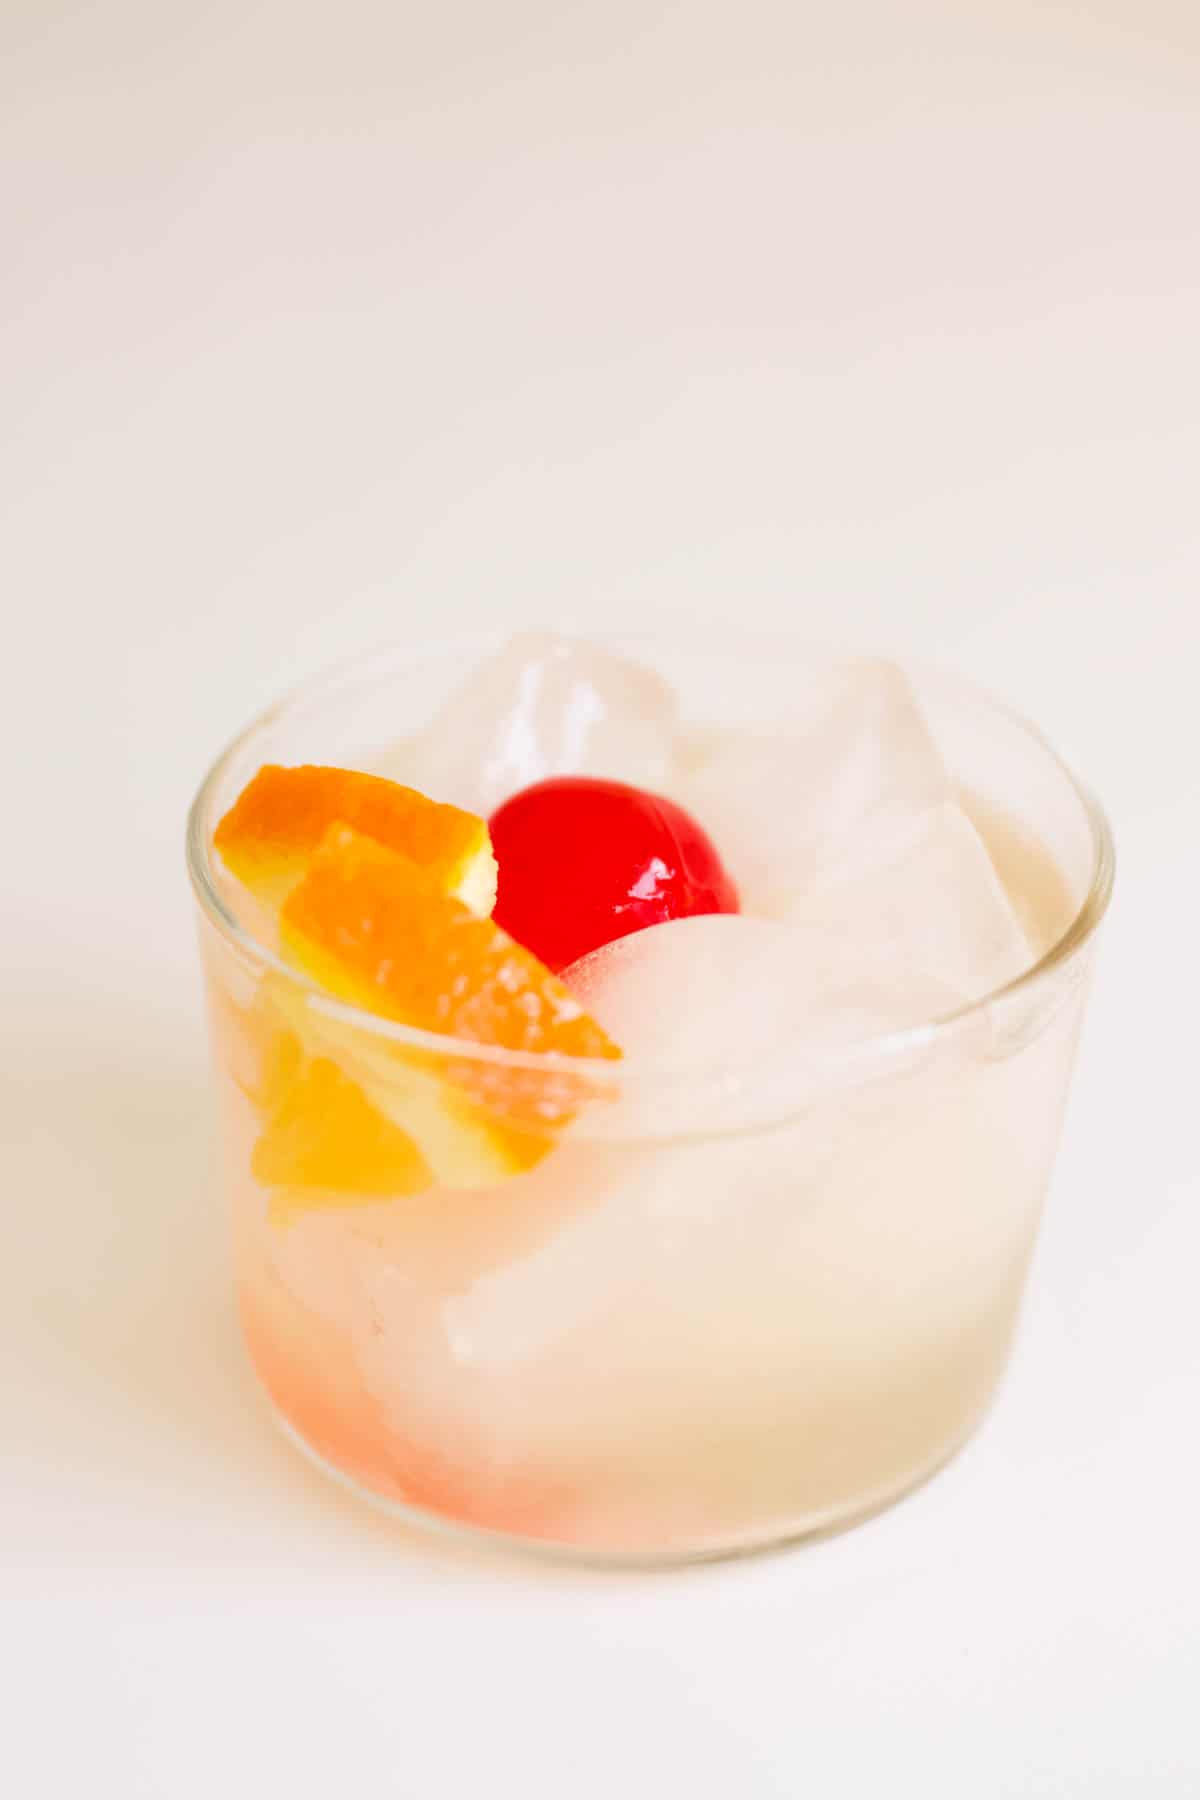 A short cocktail glass with an Amaretto sour garnished with an orange slice and cherry.